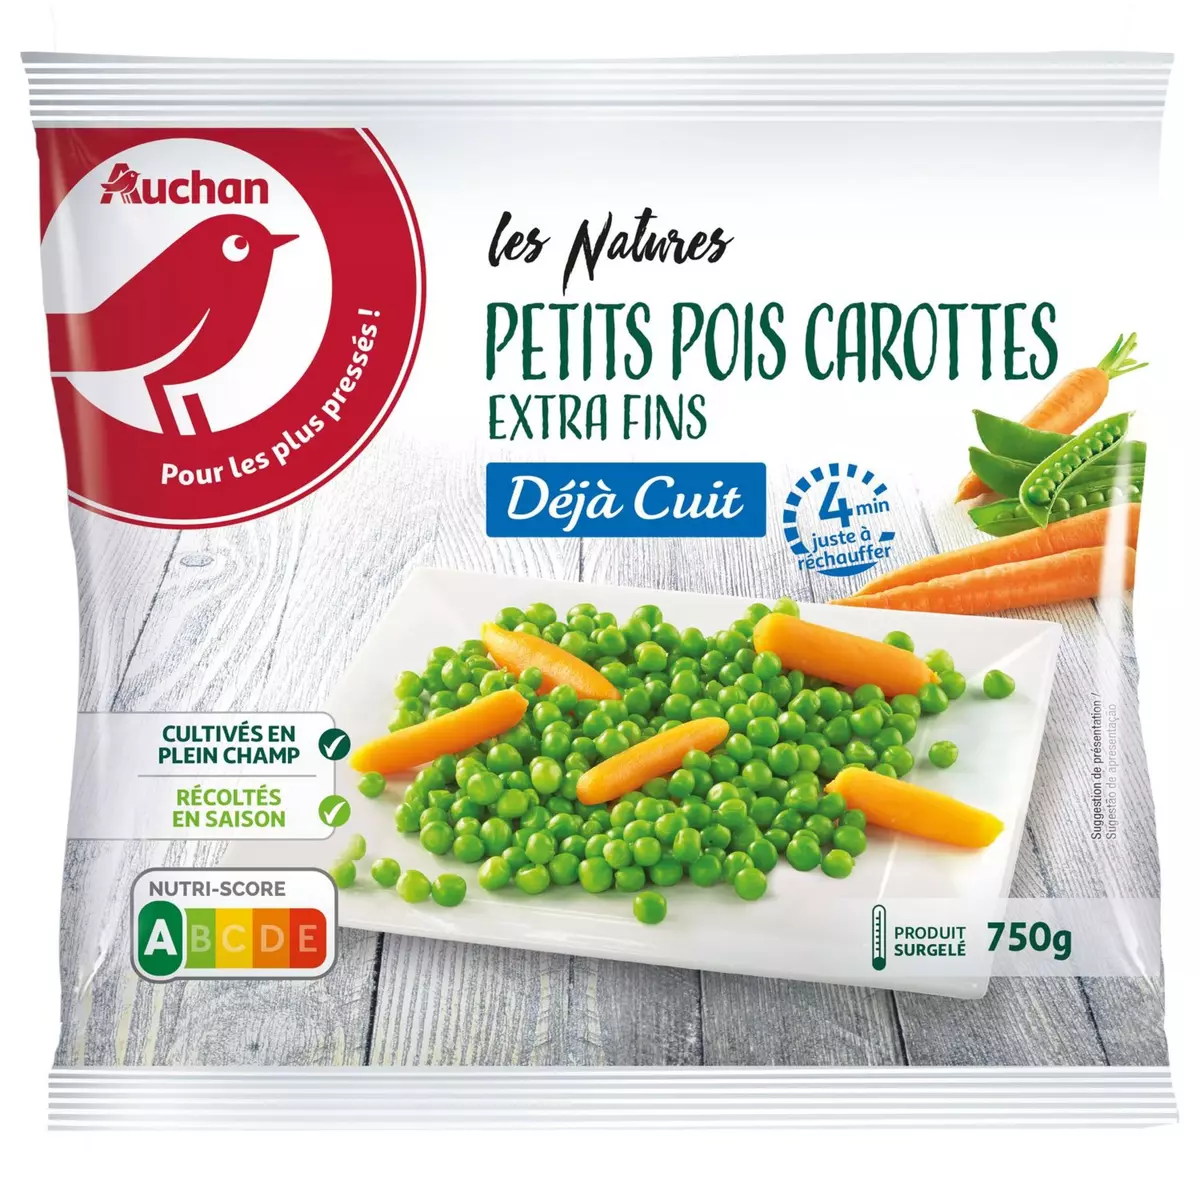 AUCHAN Petits pois carottes minute extra fins 5 portions 750g